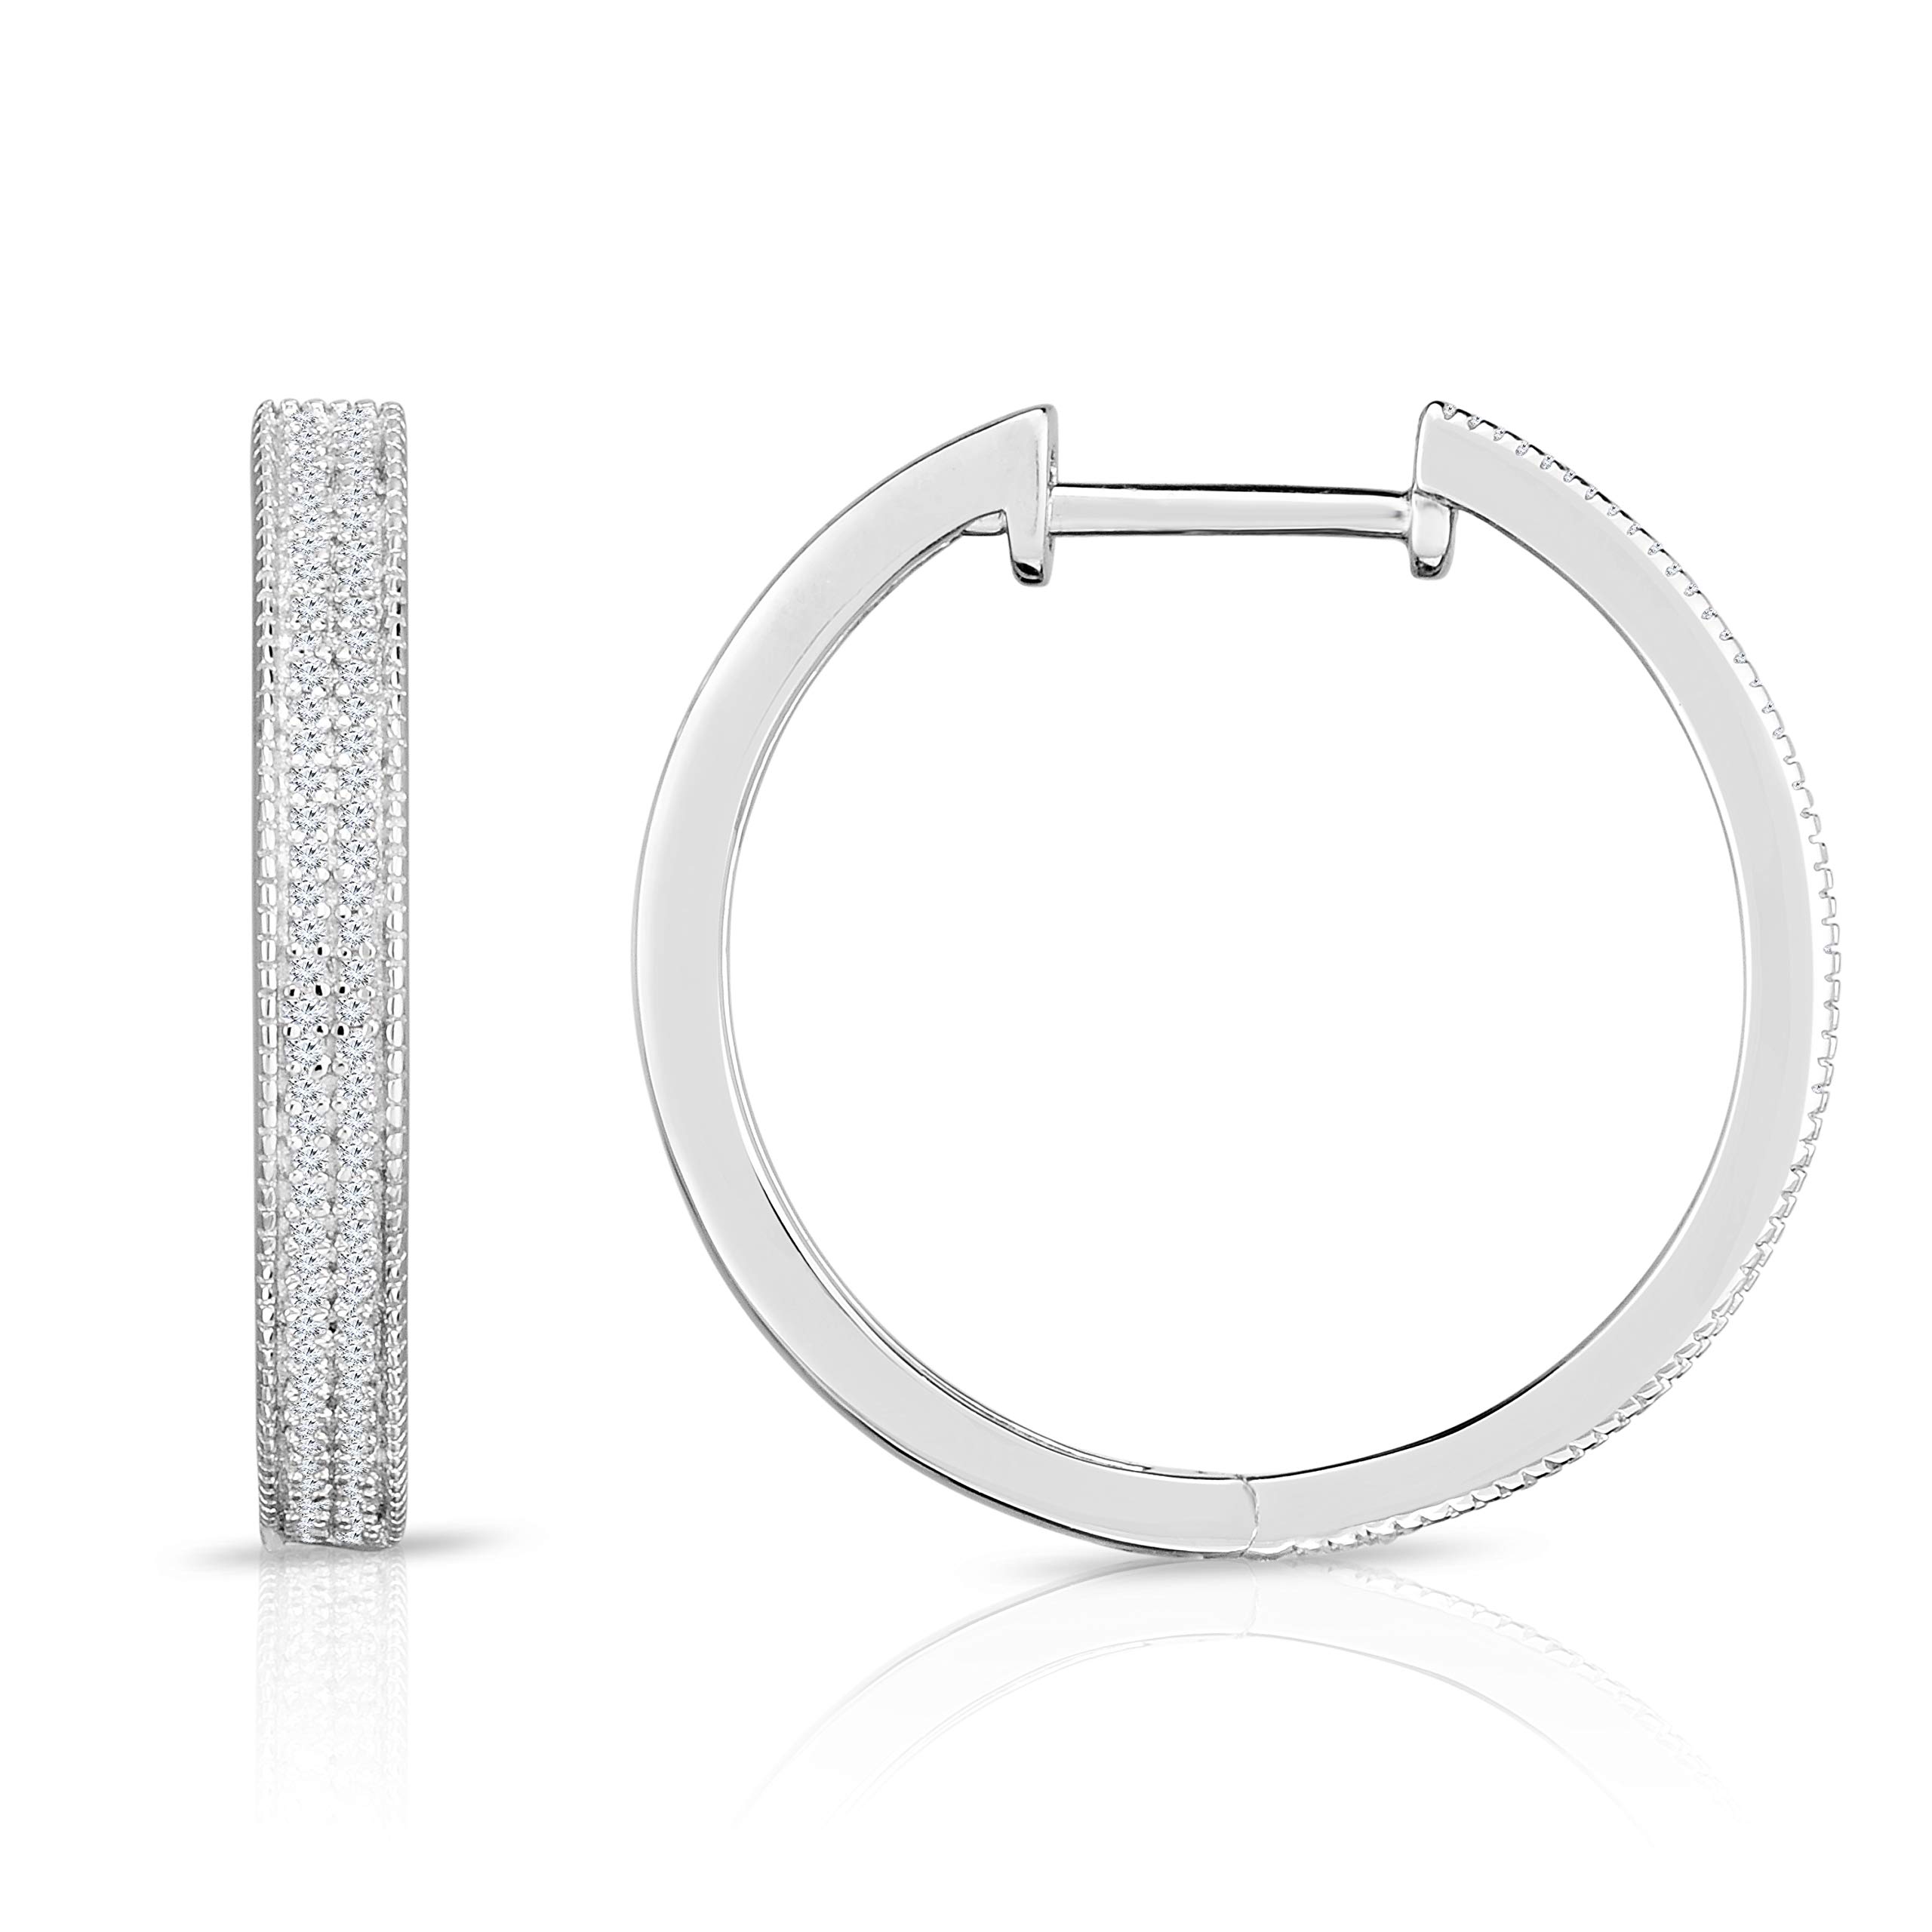 NATALIA DRAKE Diamond Hoop Earrings for Women in Rhodium Plated Sterling Silver (Color HI/Clarity I2-I3)